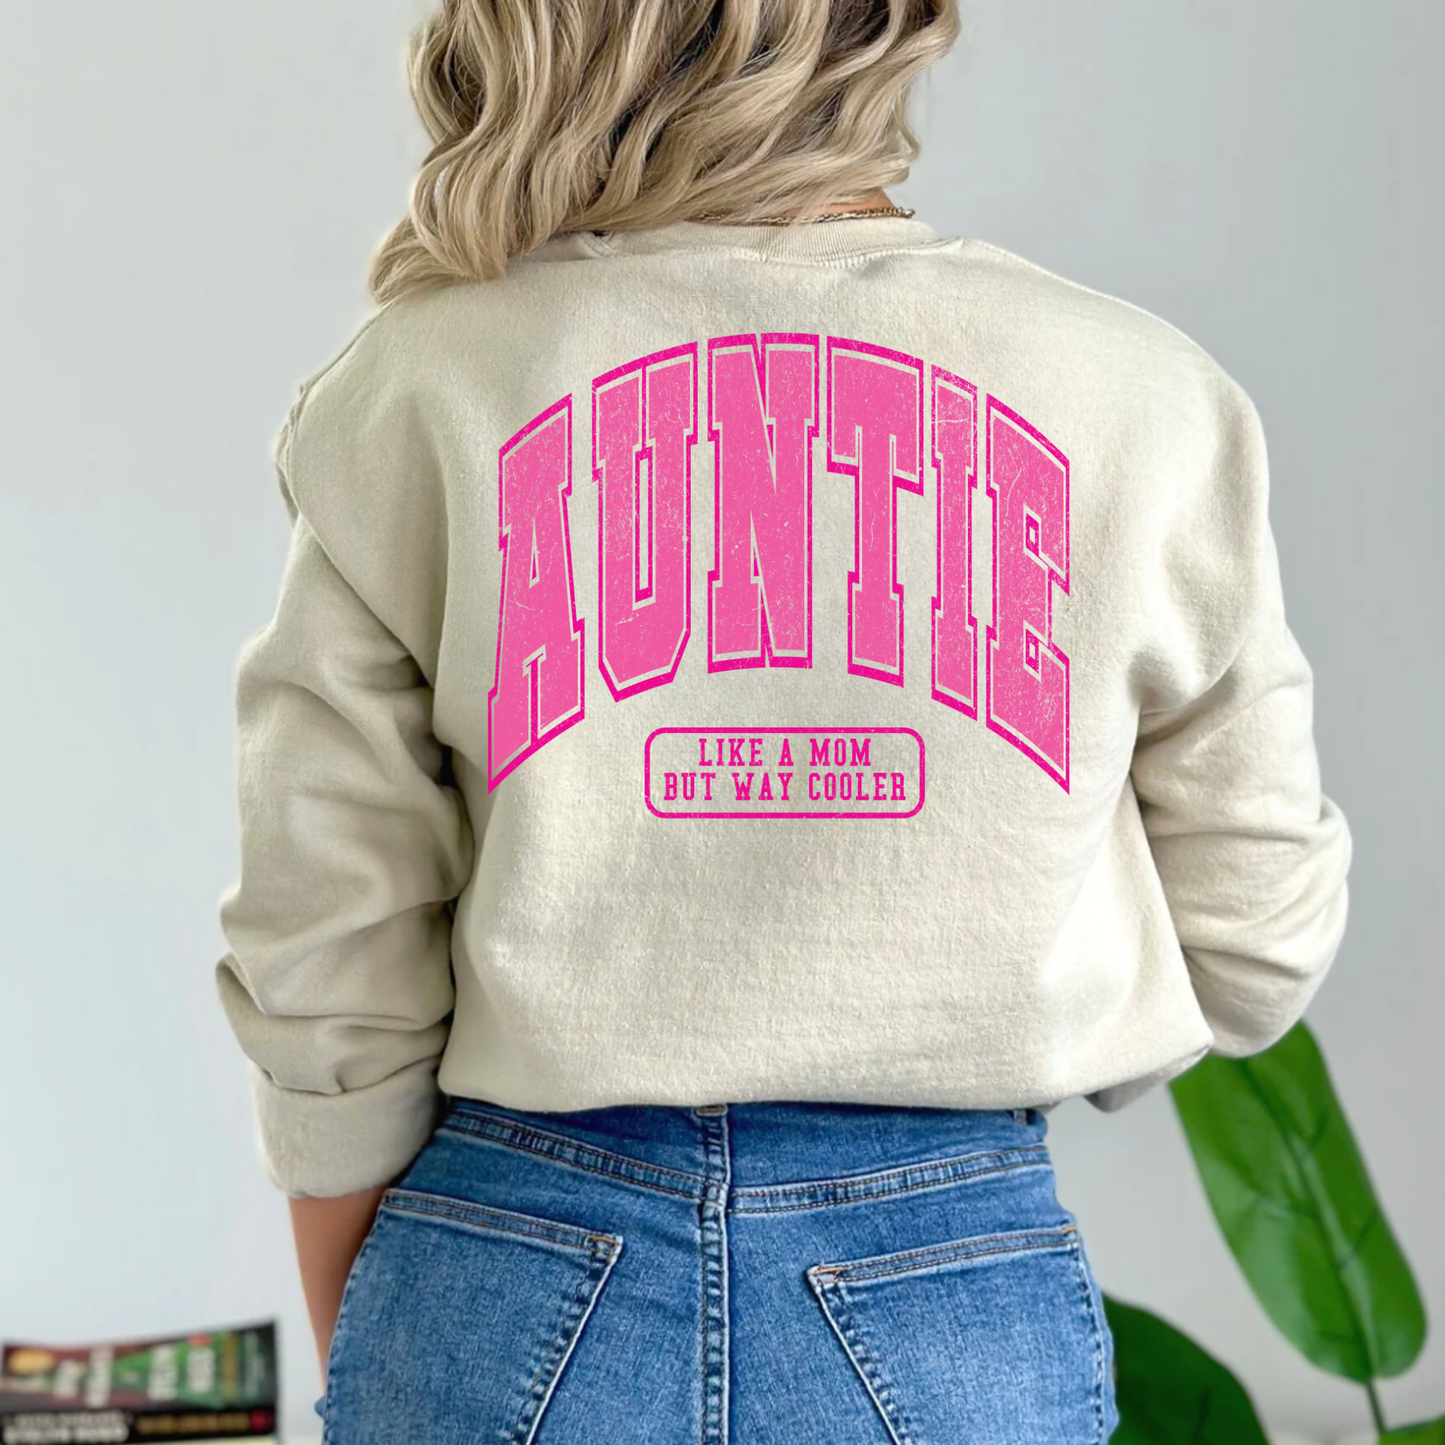 (shirt not included) Auntie - like a mom, but way cooler -  Screen print Transfer in Pink